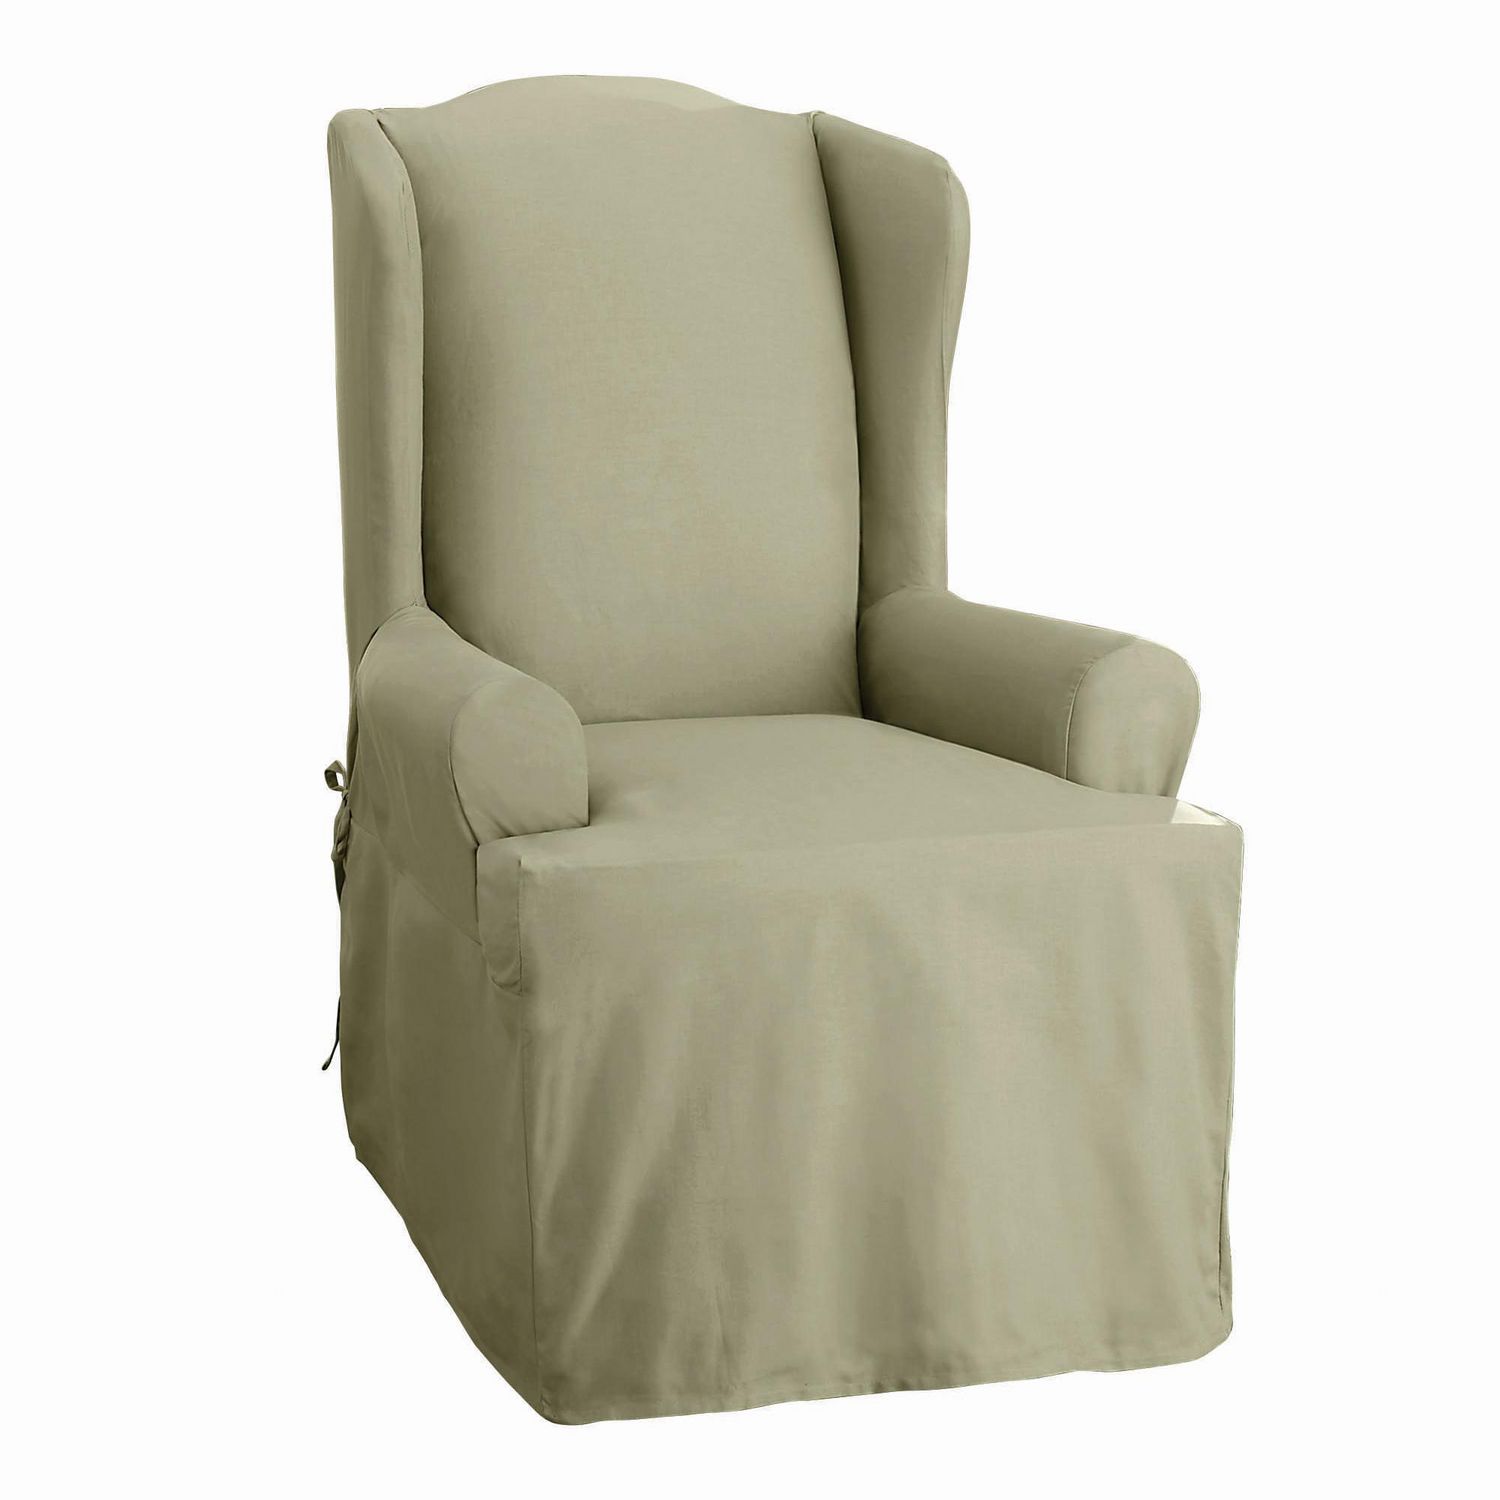 Unique Wing Chair Slipcover Walmart Canada for Large Space